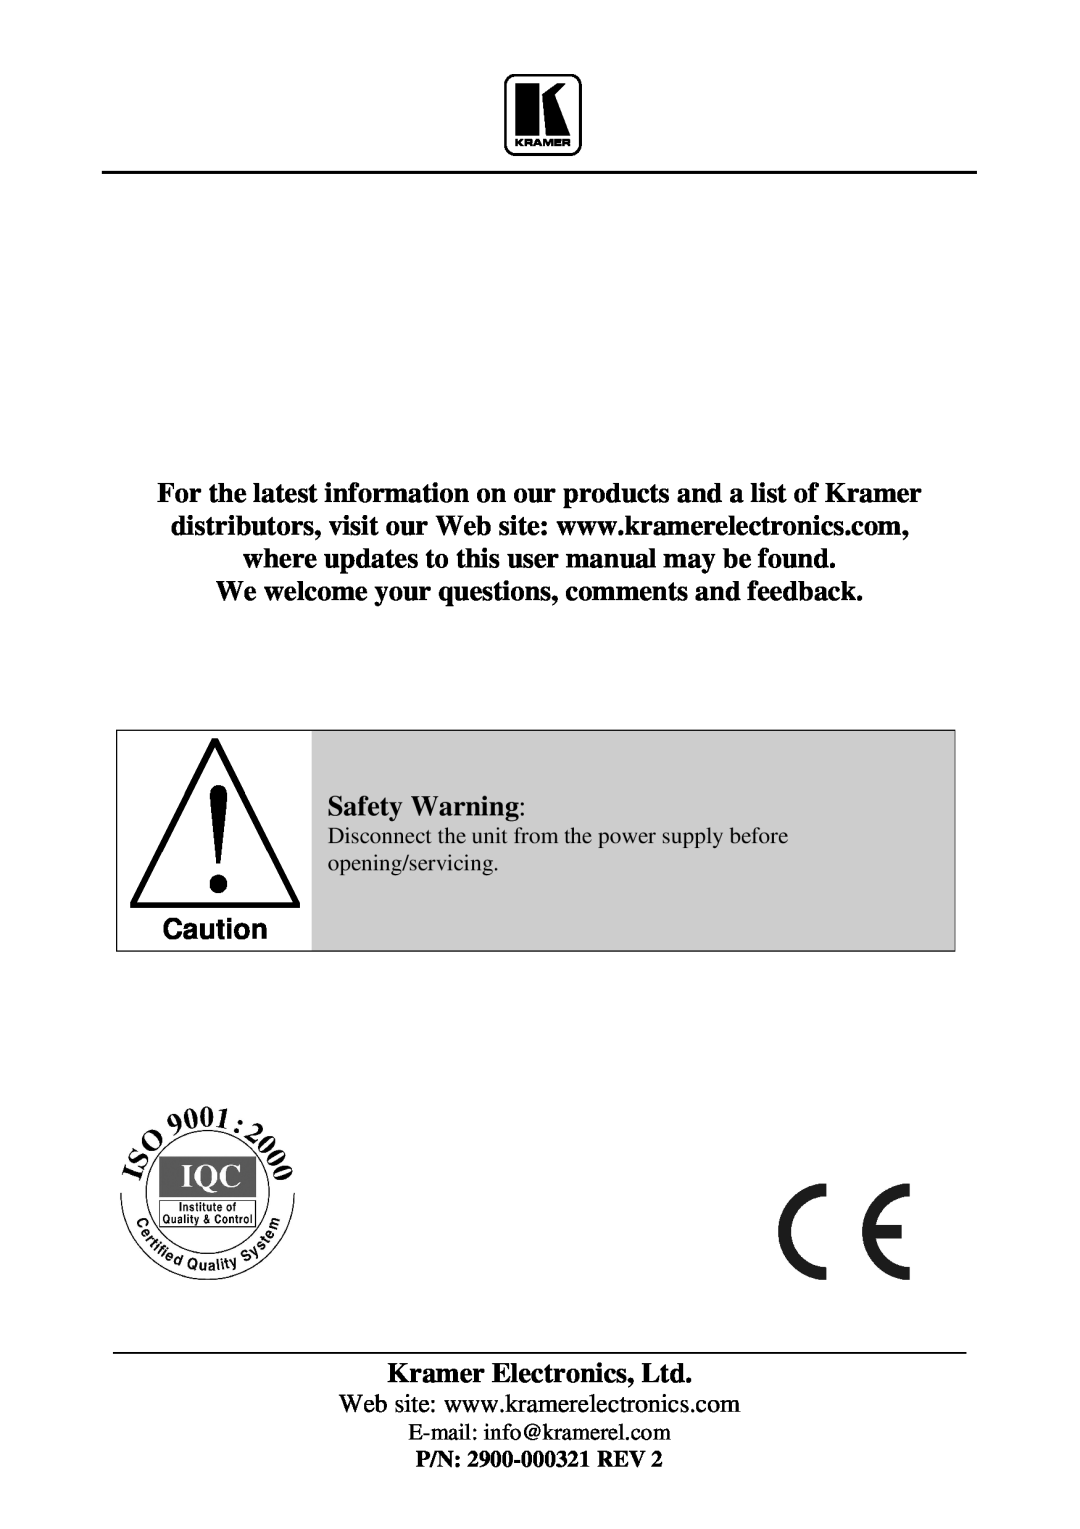 Kramer Electronics VM-20HD user manual We welcome your questions, comments and feedback, Safety Warning 